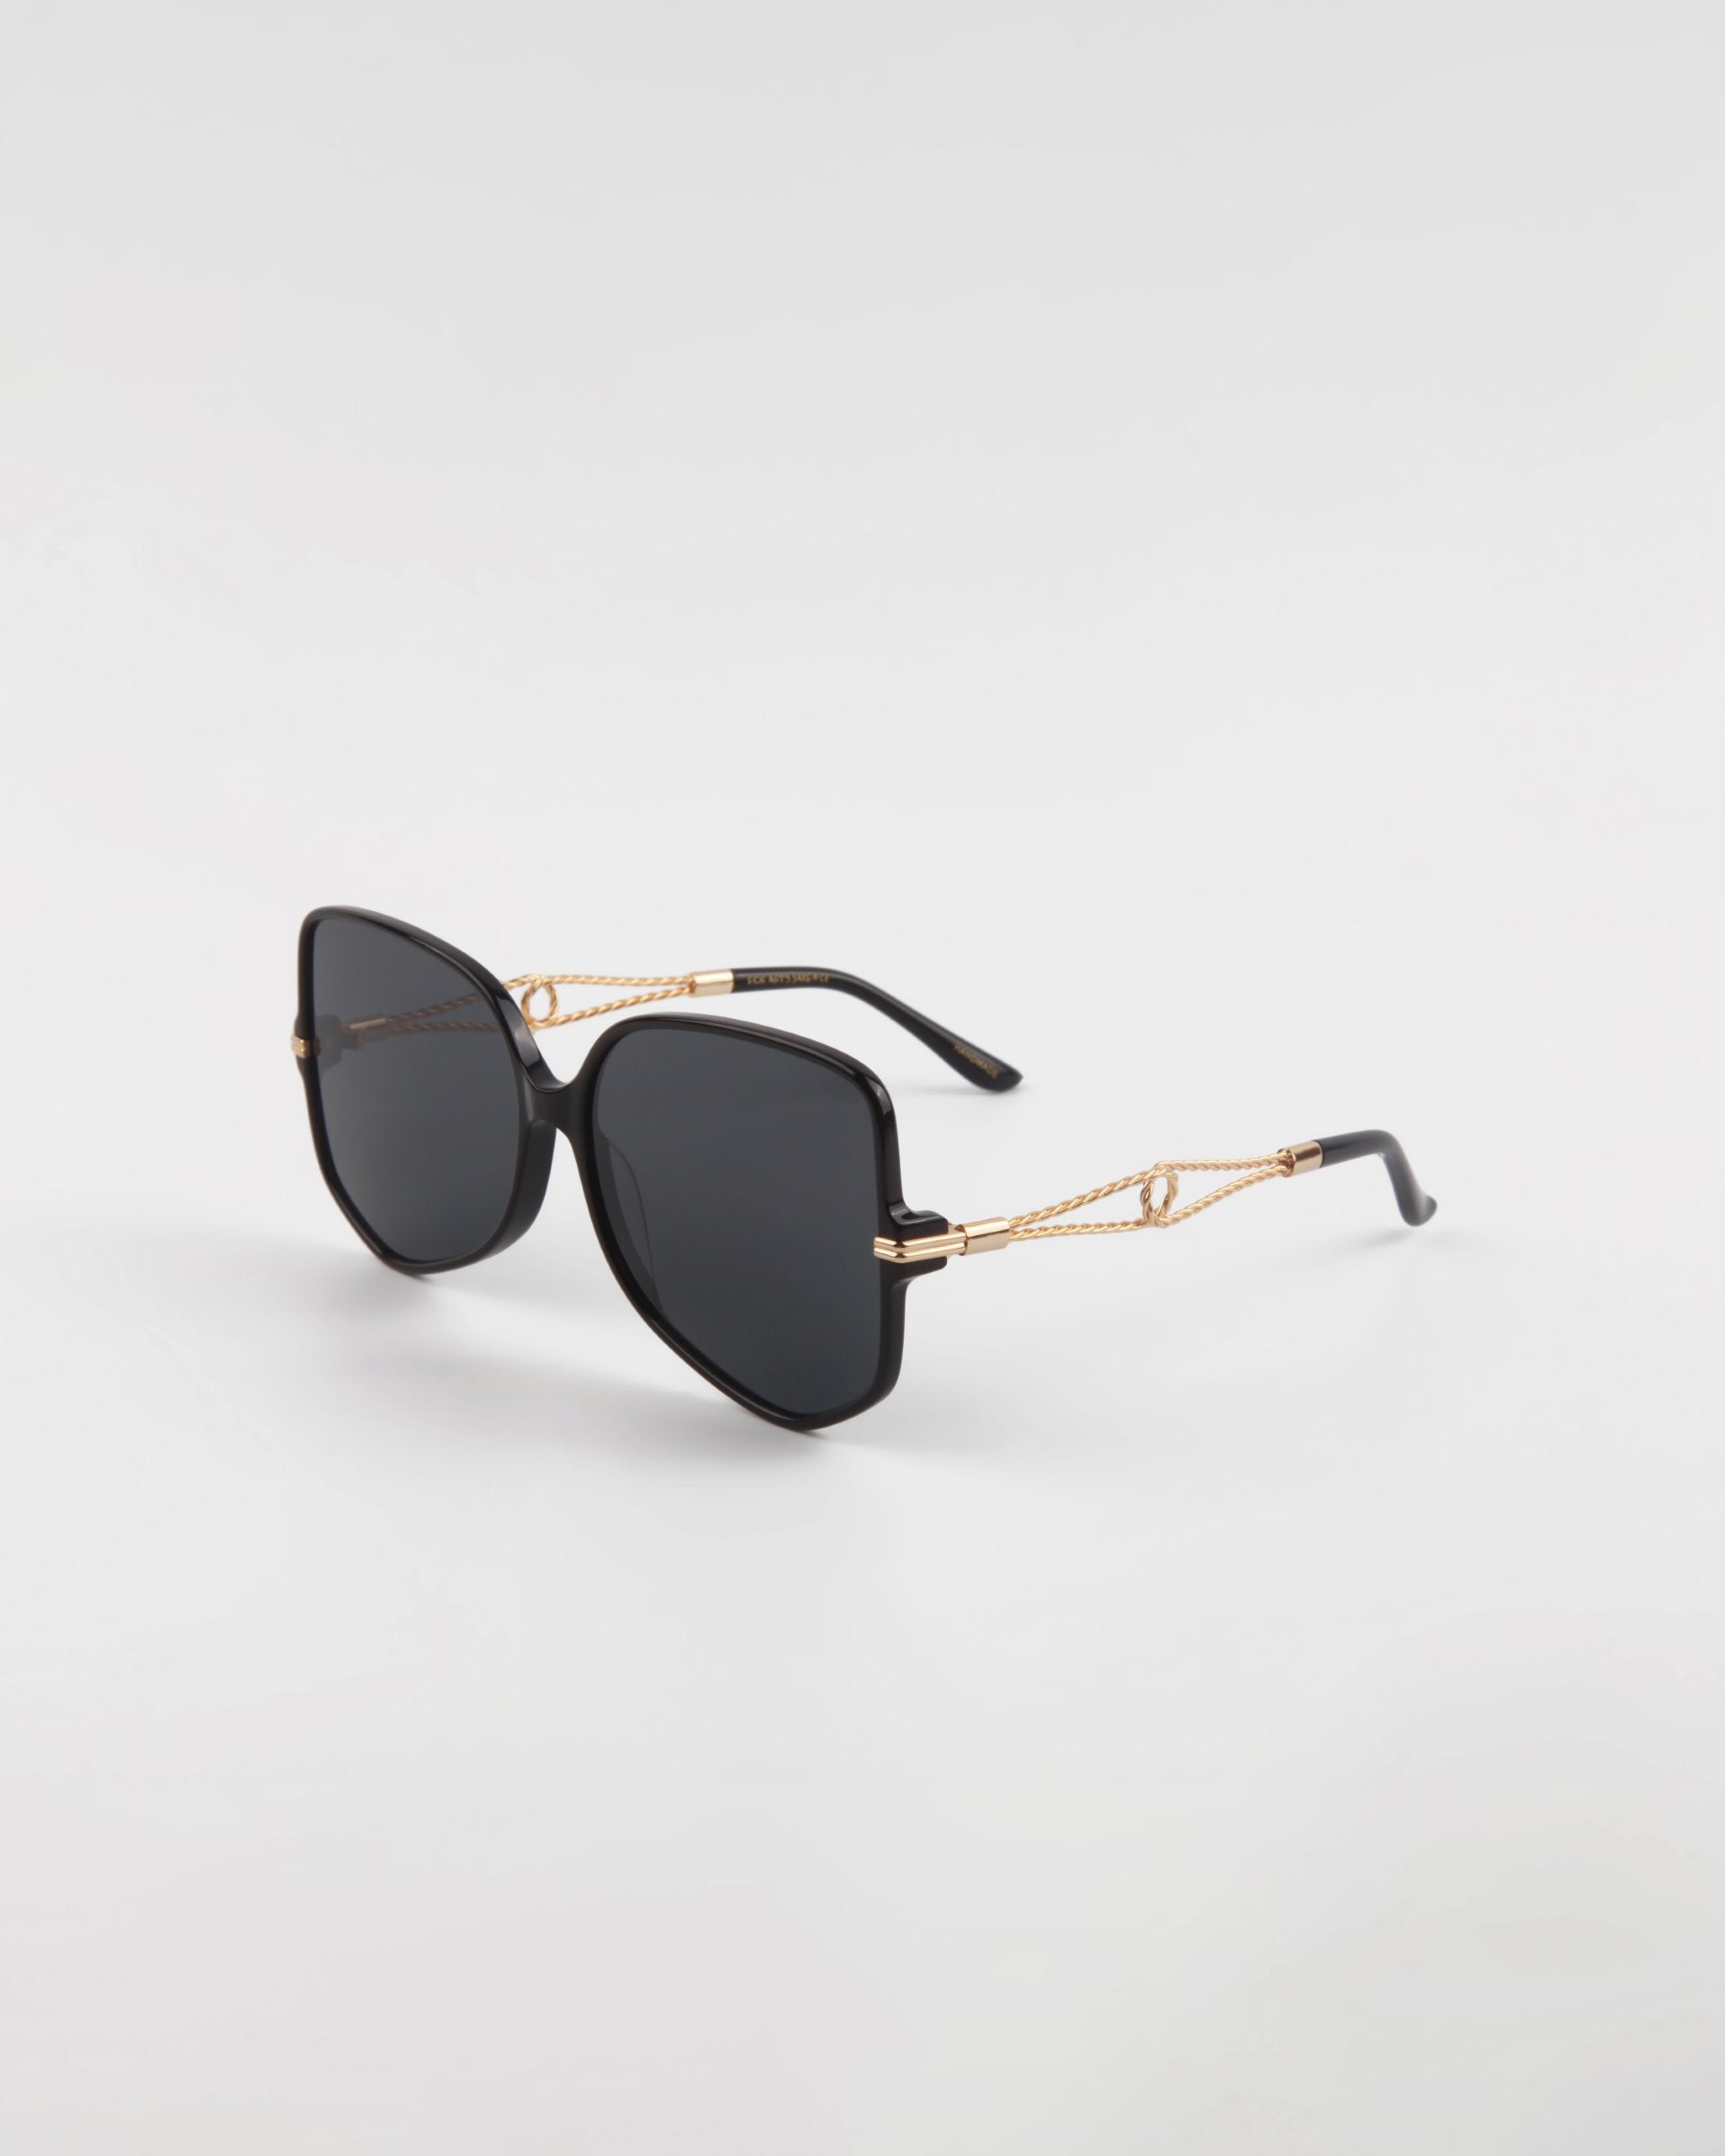 A pair of black Voyager sunglasses from For Art's Sake® with large, square lenses and gold-tone intricate detailing on the temples are placed against a plain white background. The arms of the Voyager sunglasses, crafted from handmade acetate eyewear, have a slight curve towards the ends.